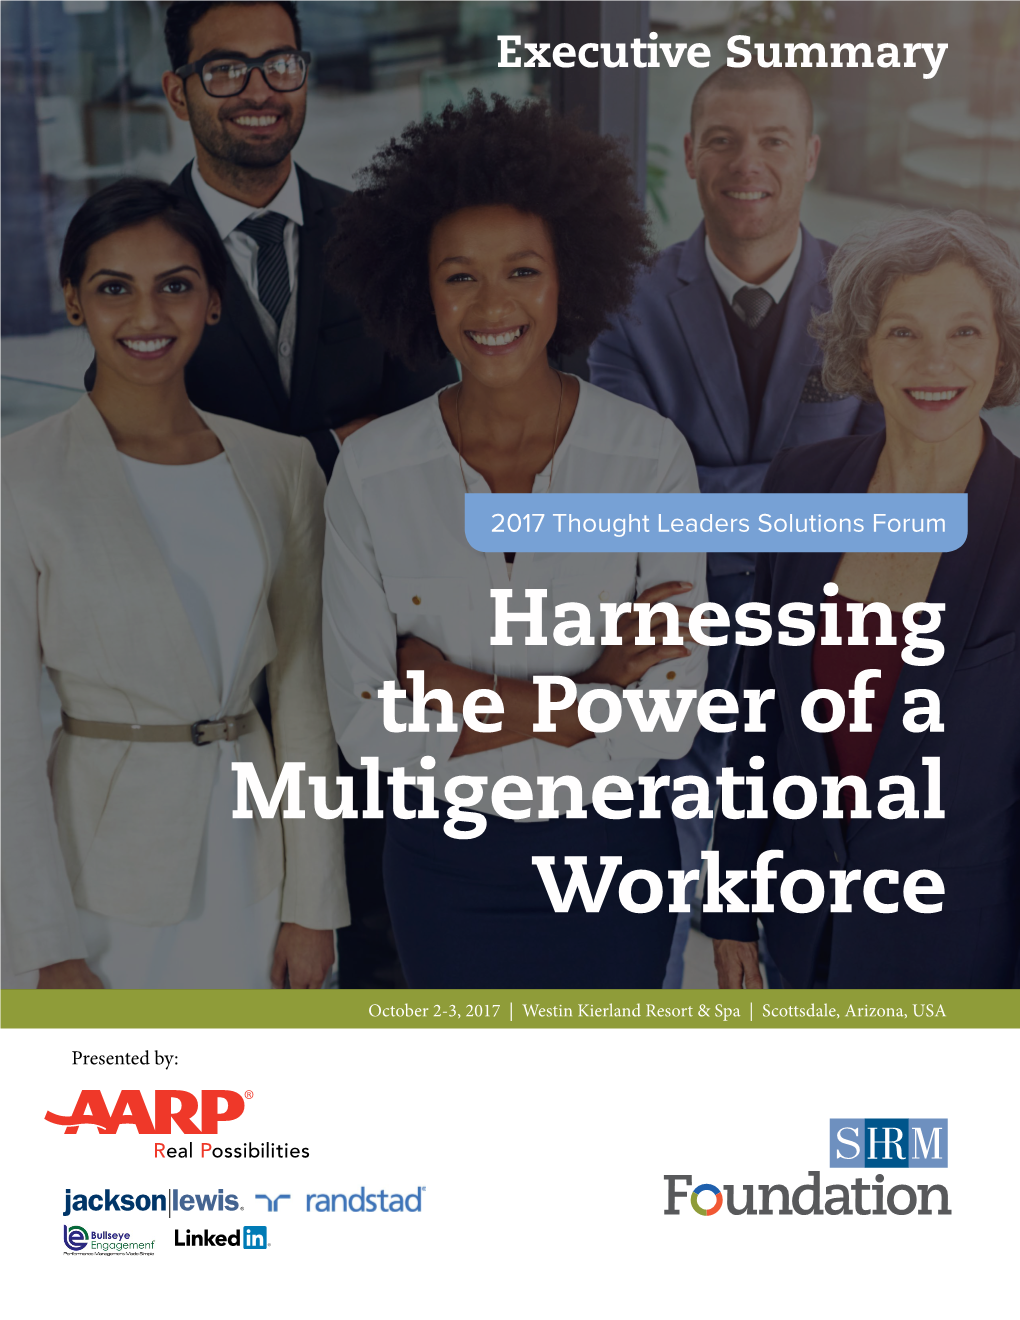 Harnessing the Power of a Multigenerational Workforce